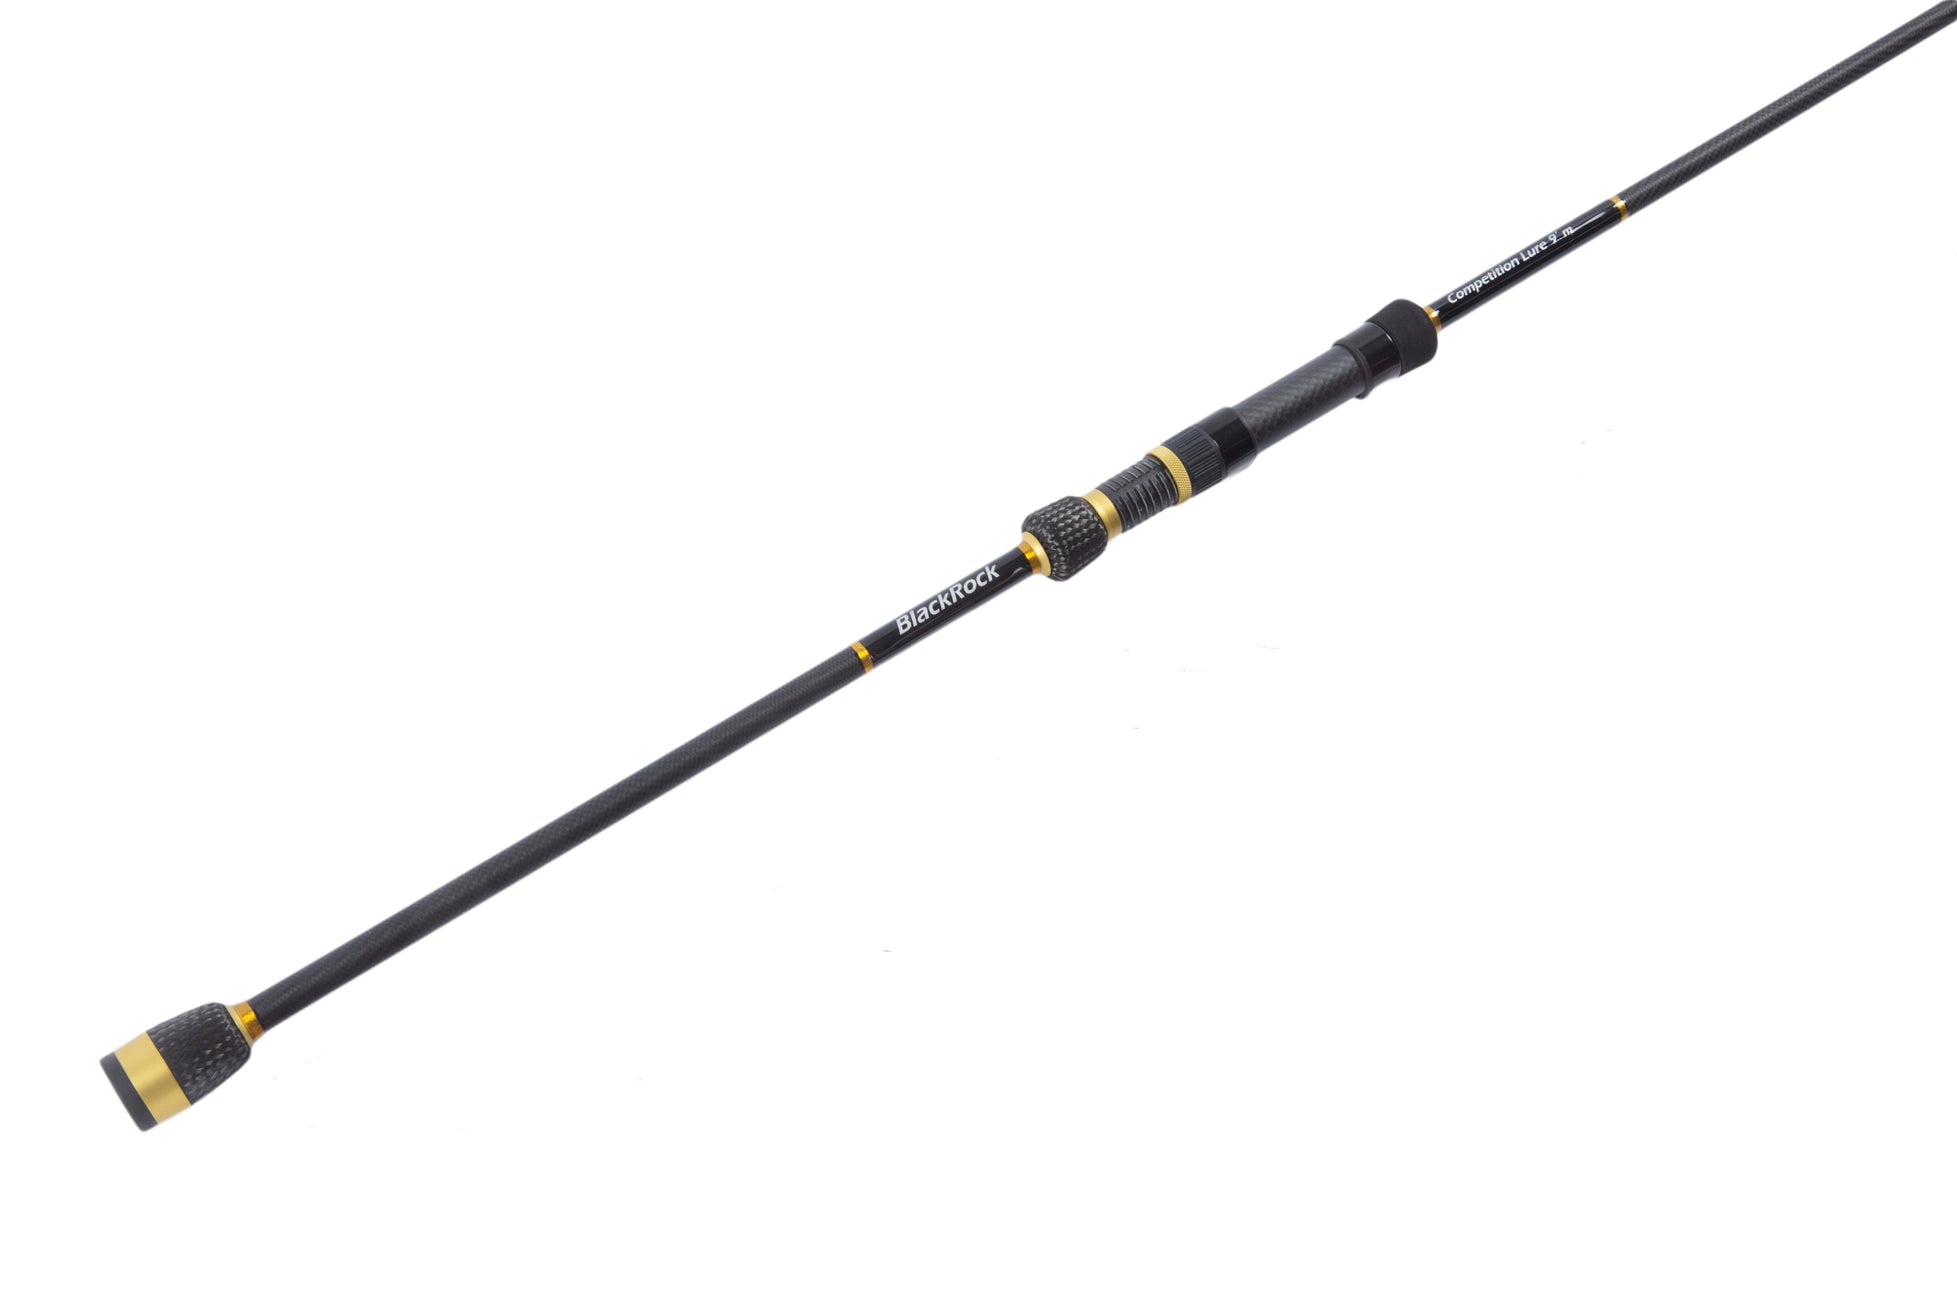 Blackrock Competition Lure Fishing Rod 9ft 7-35g